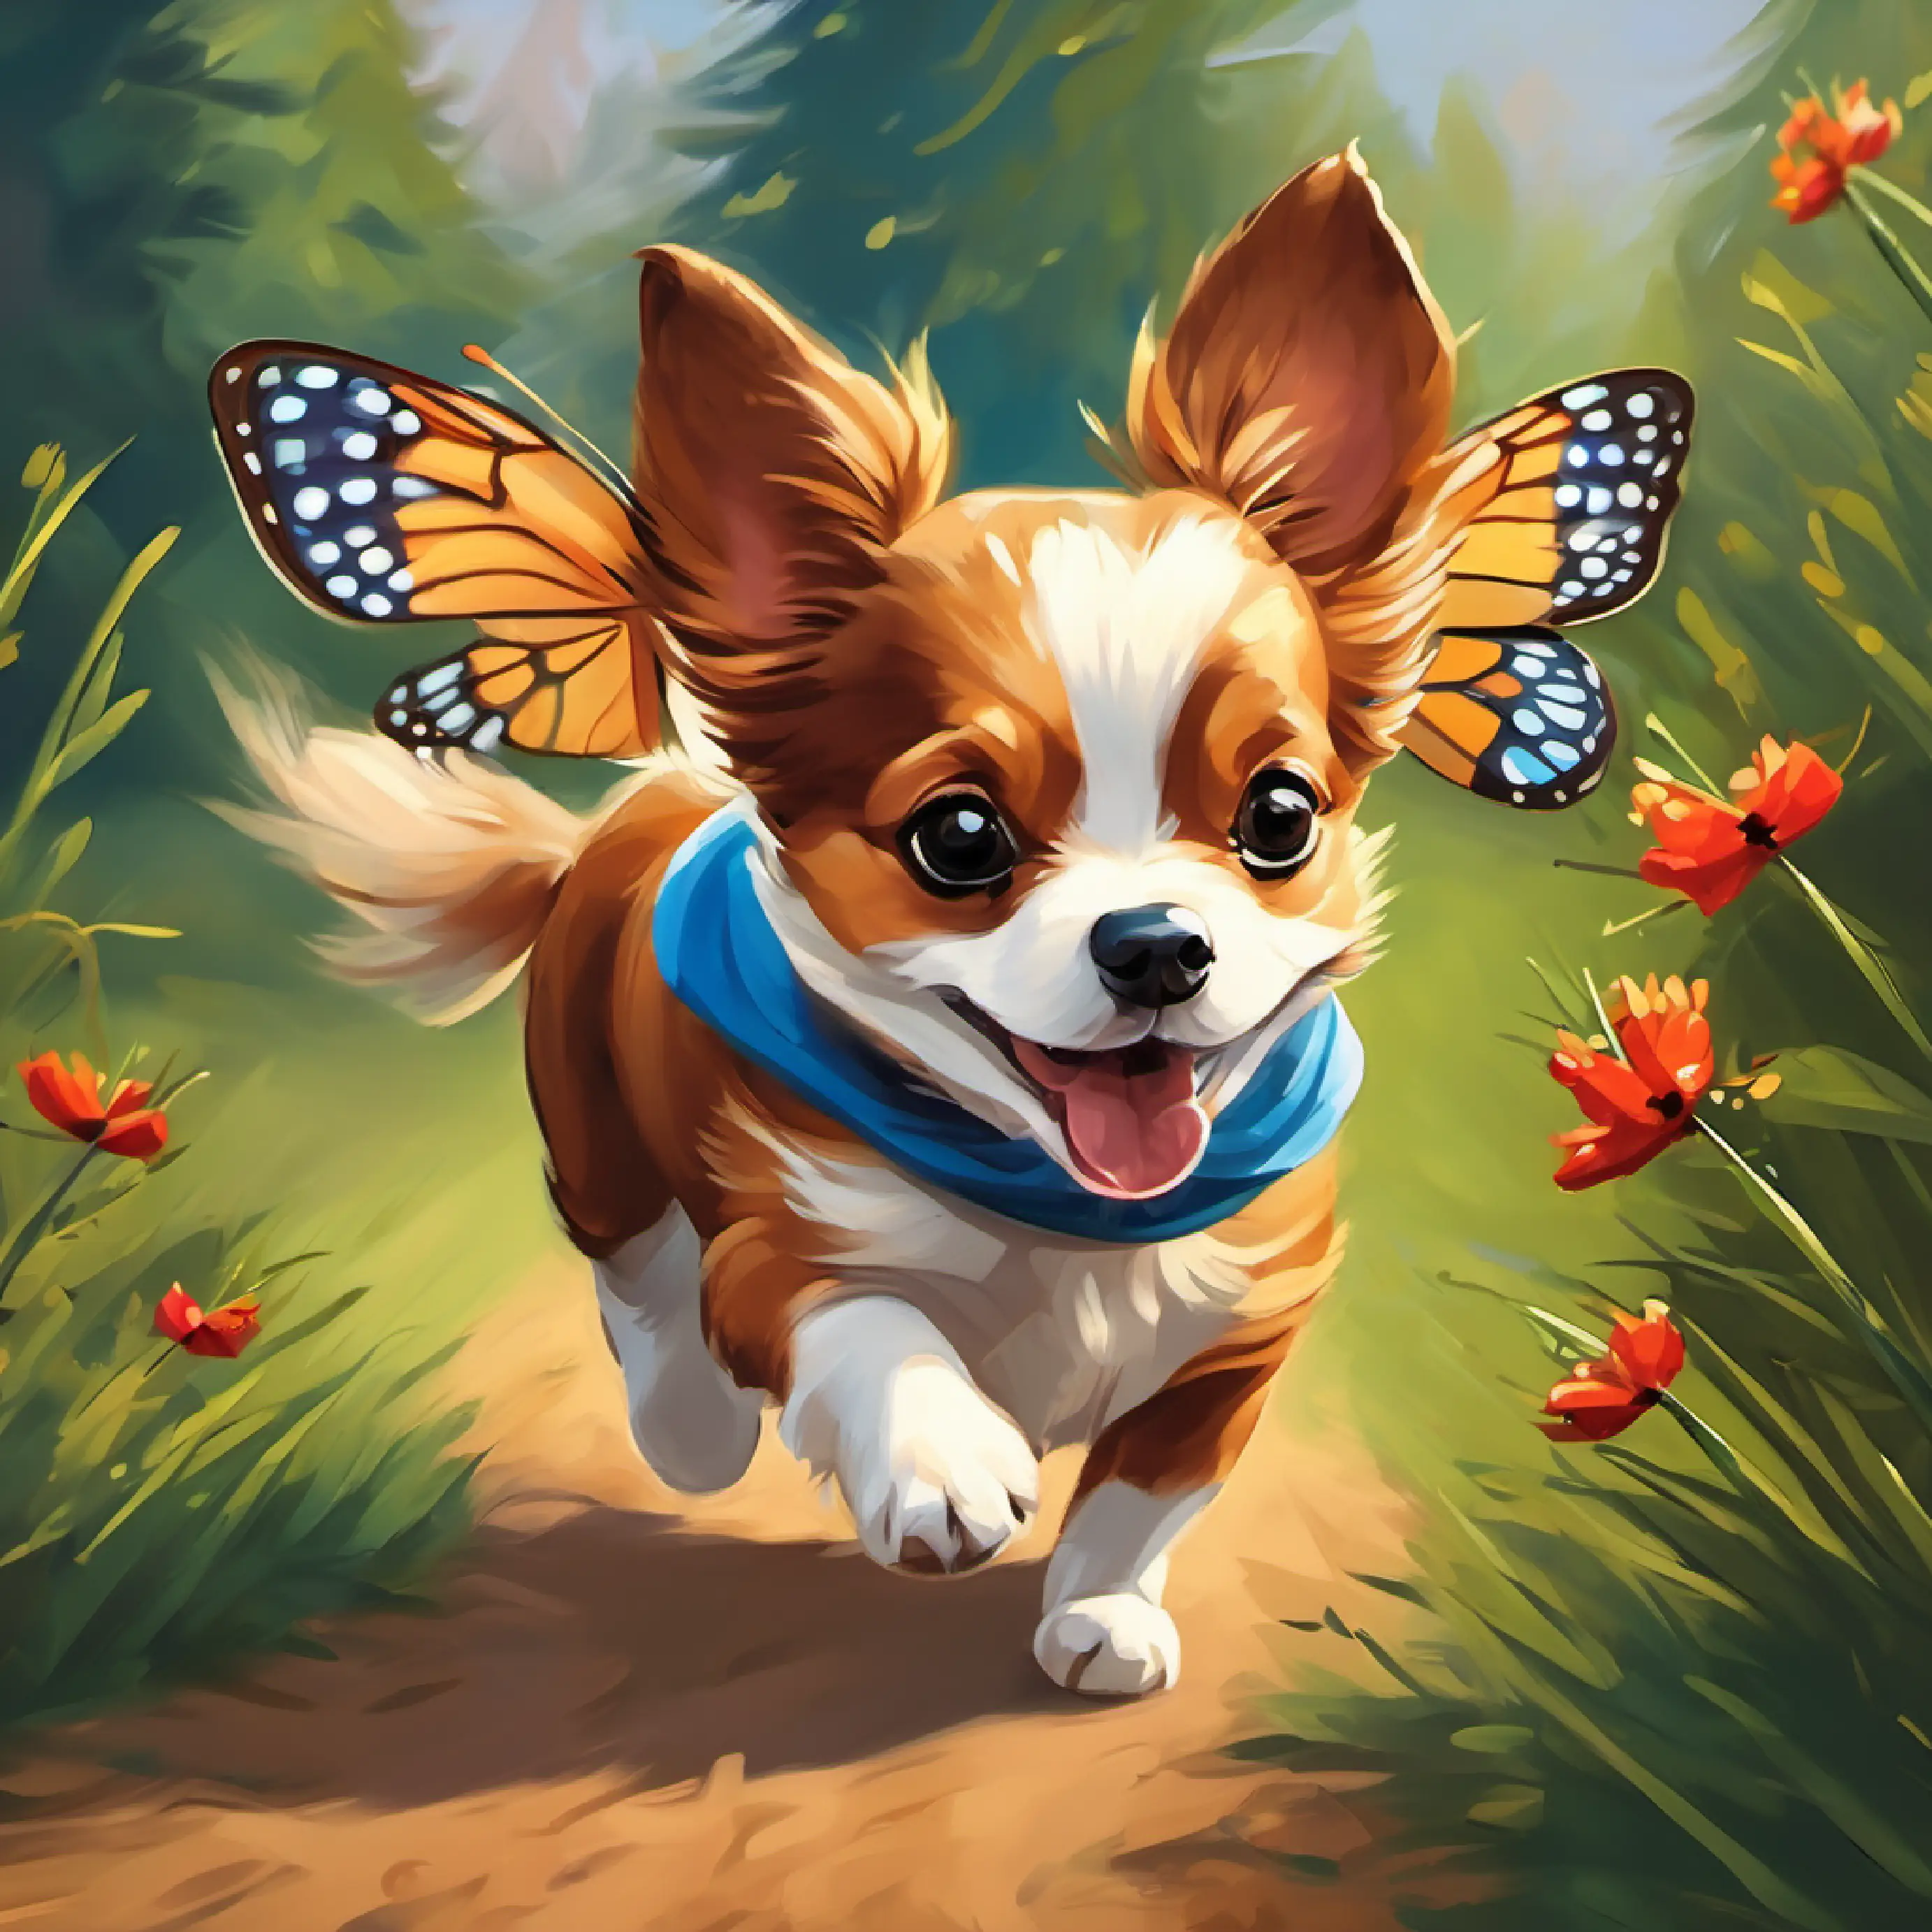 A small, playful dog with brown fur chases a beautiful butterfly.